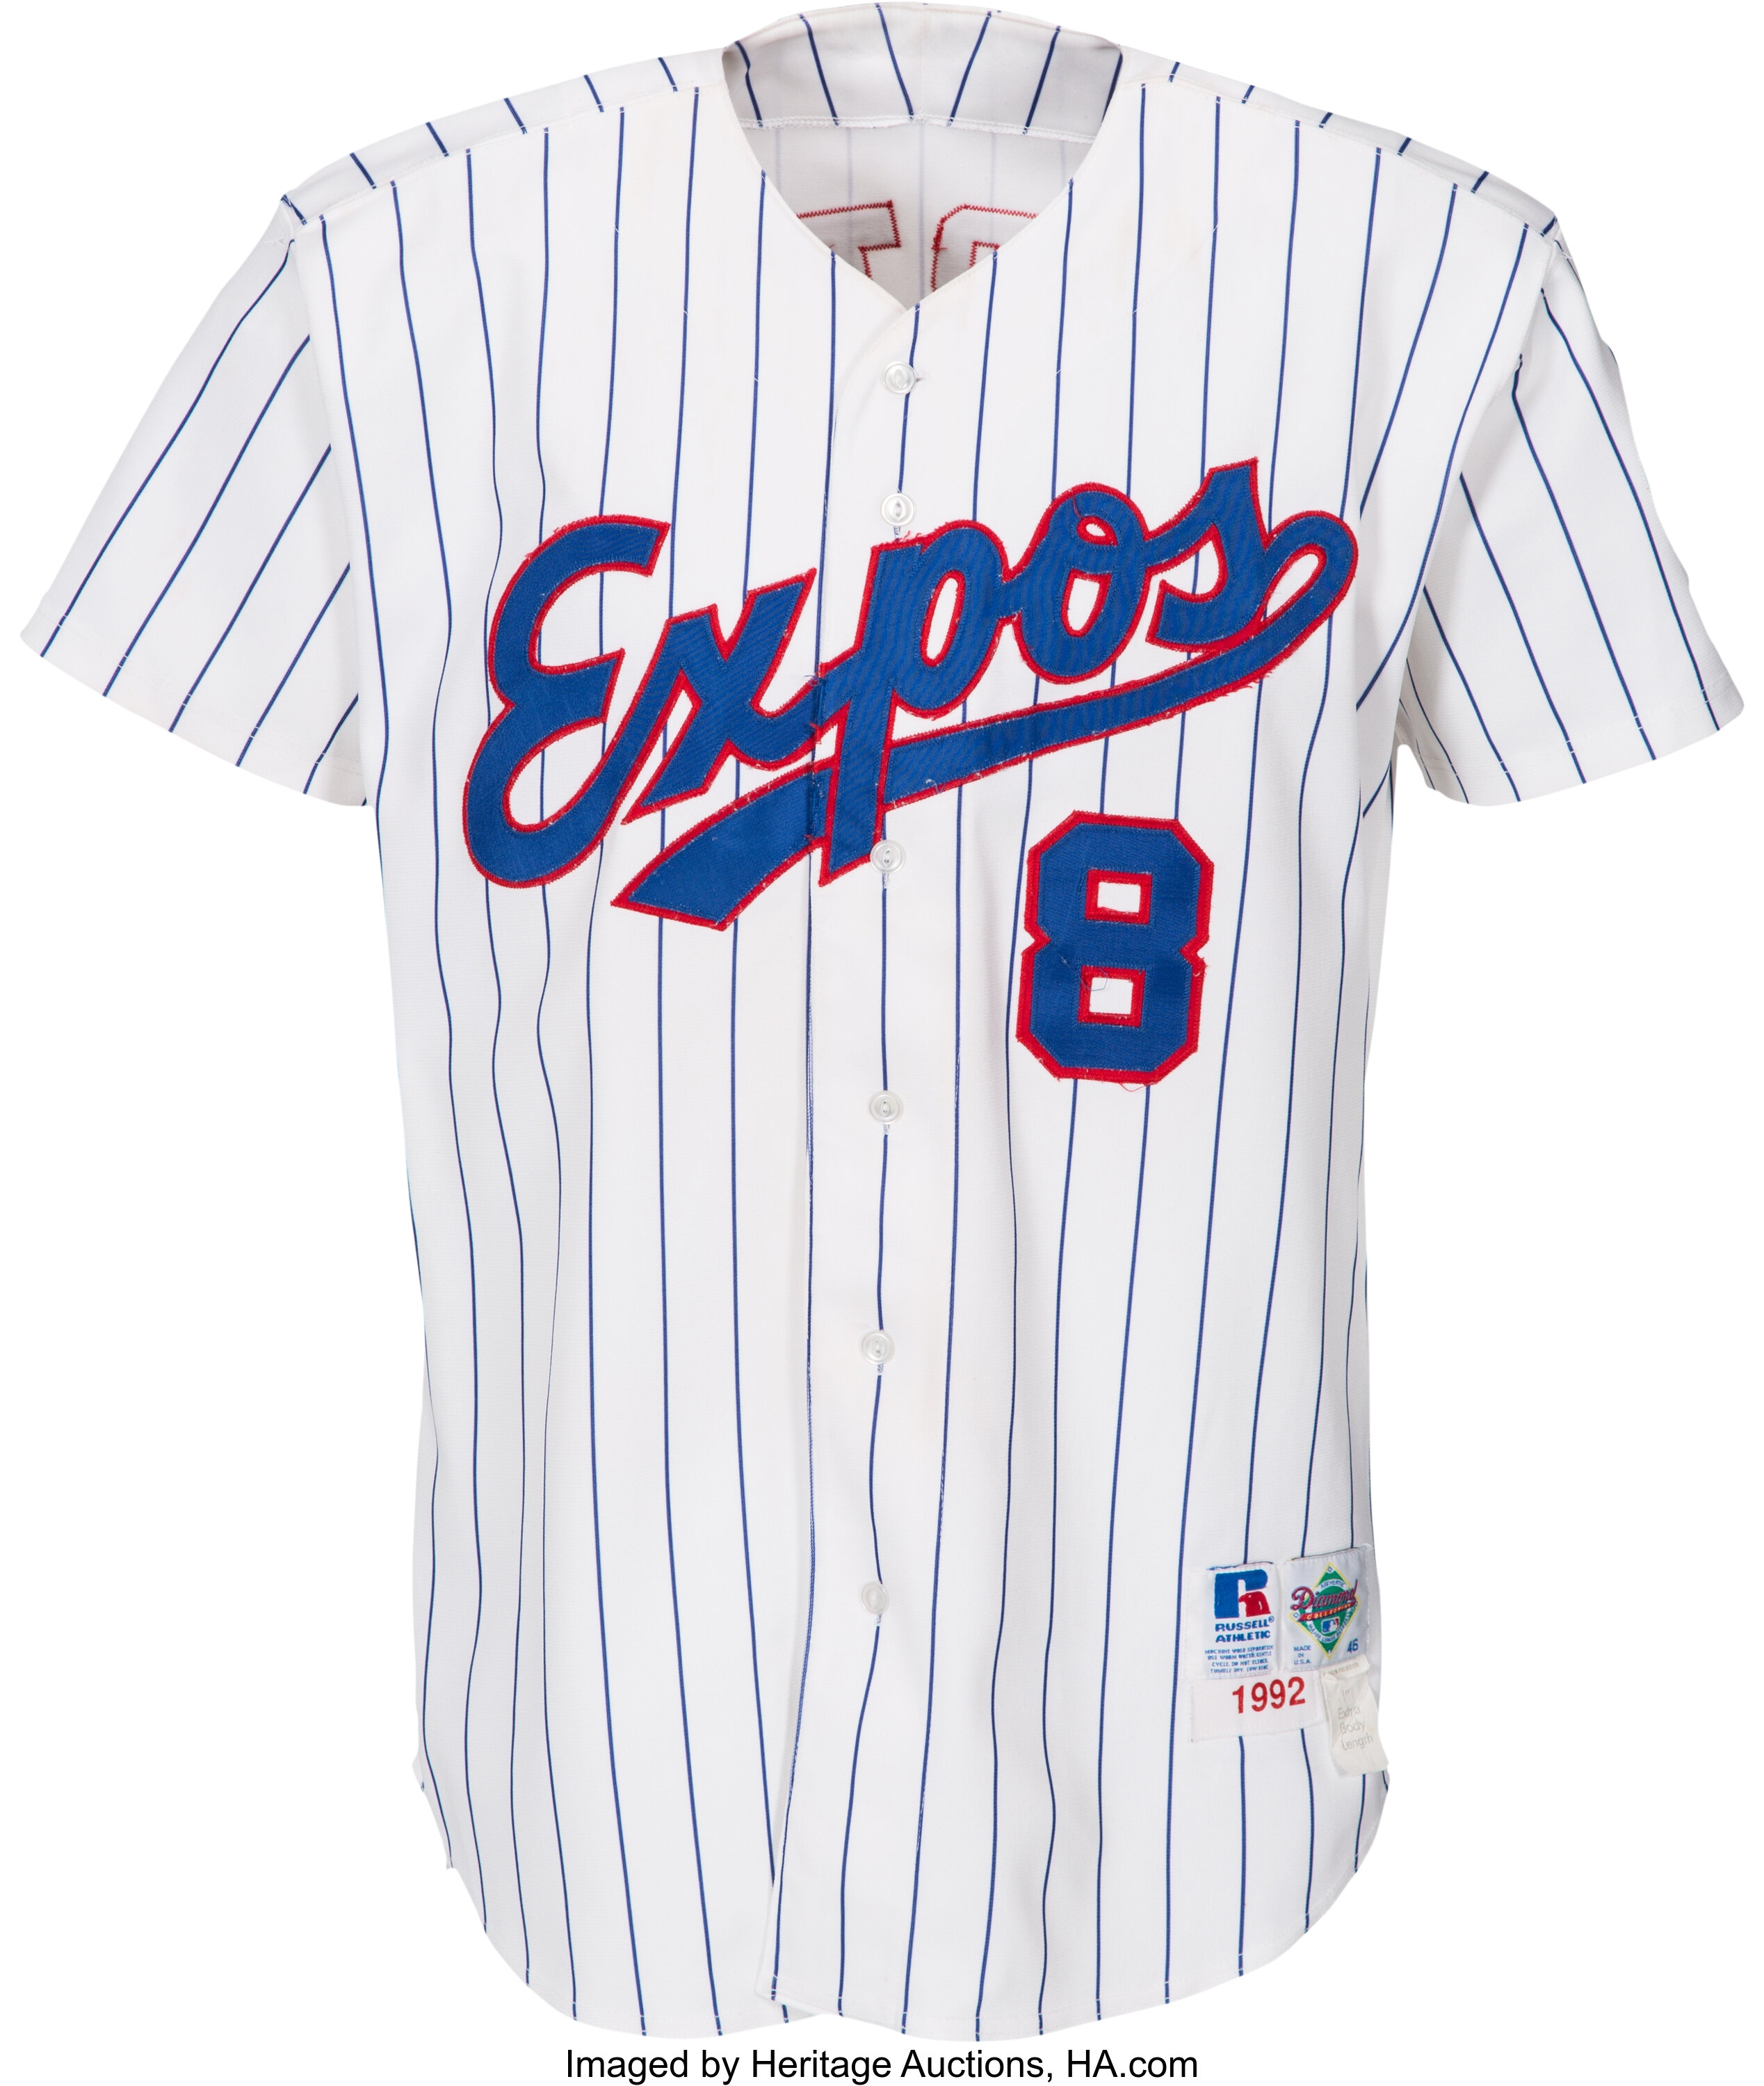 1992 Gary Carter Game Worn Montreal Expos Uniform from The Gary